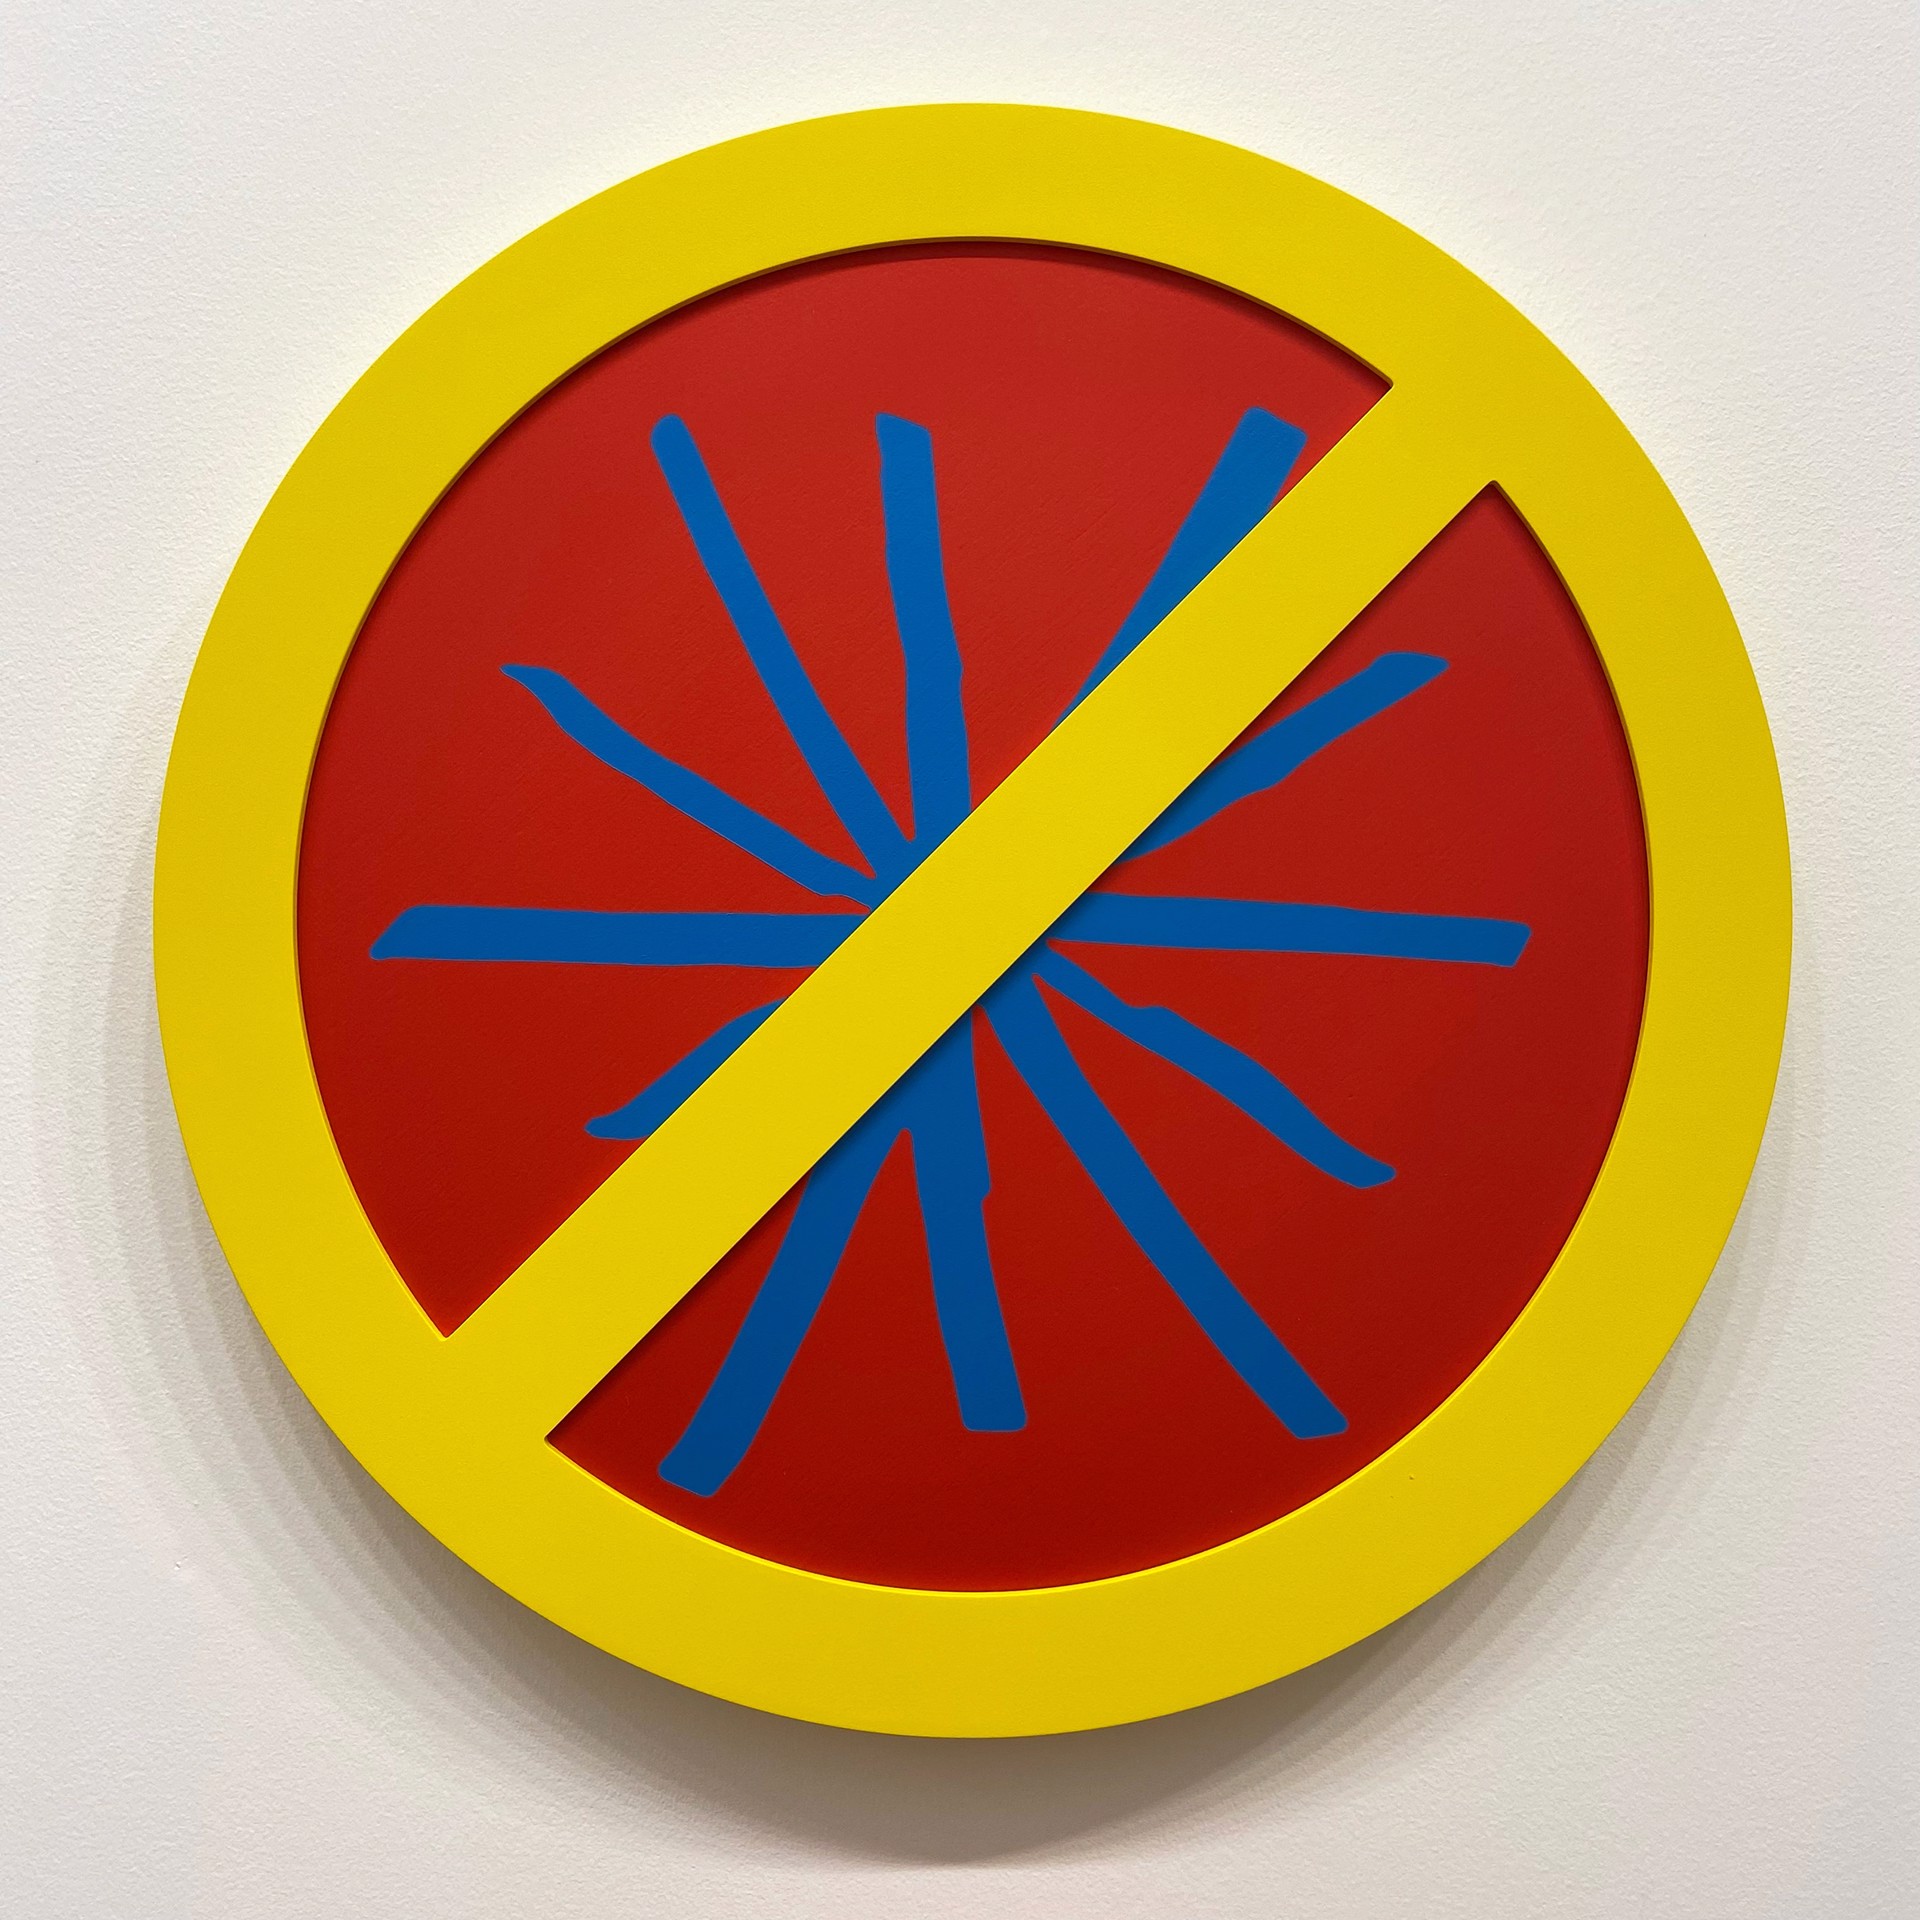 No Assholes (Blue on Red) by Michael Porten